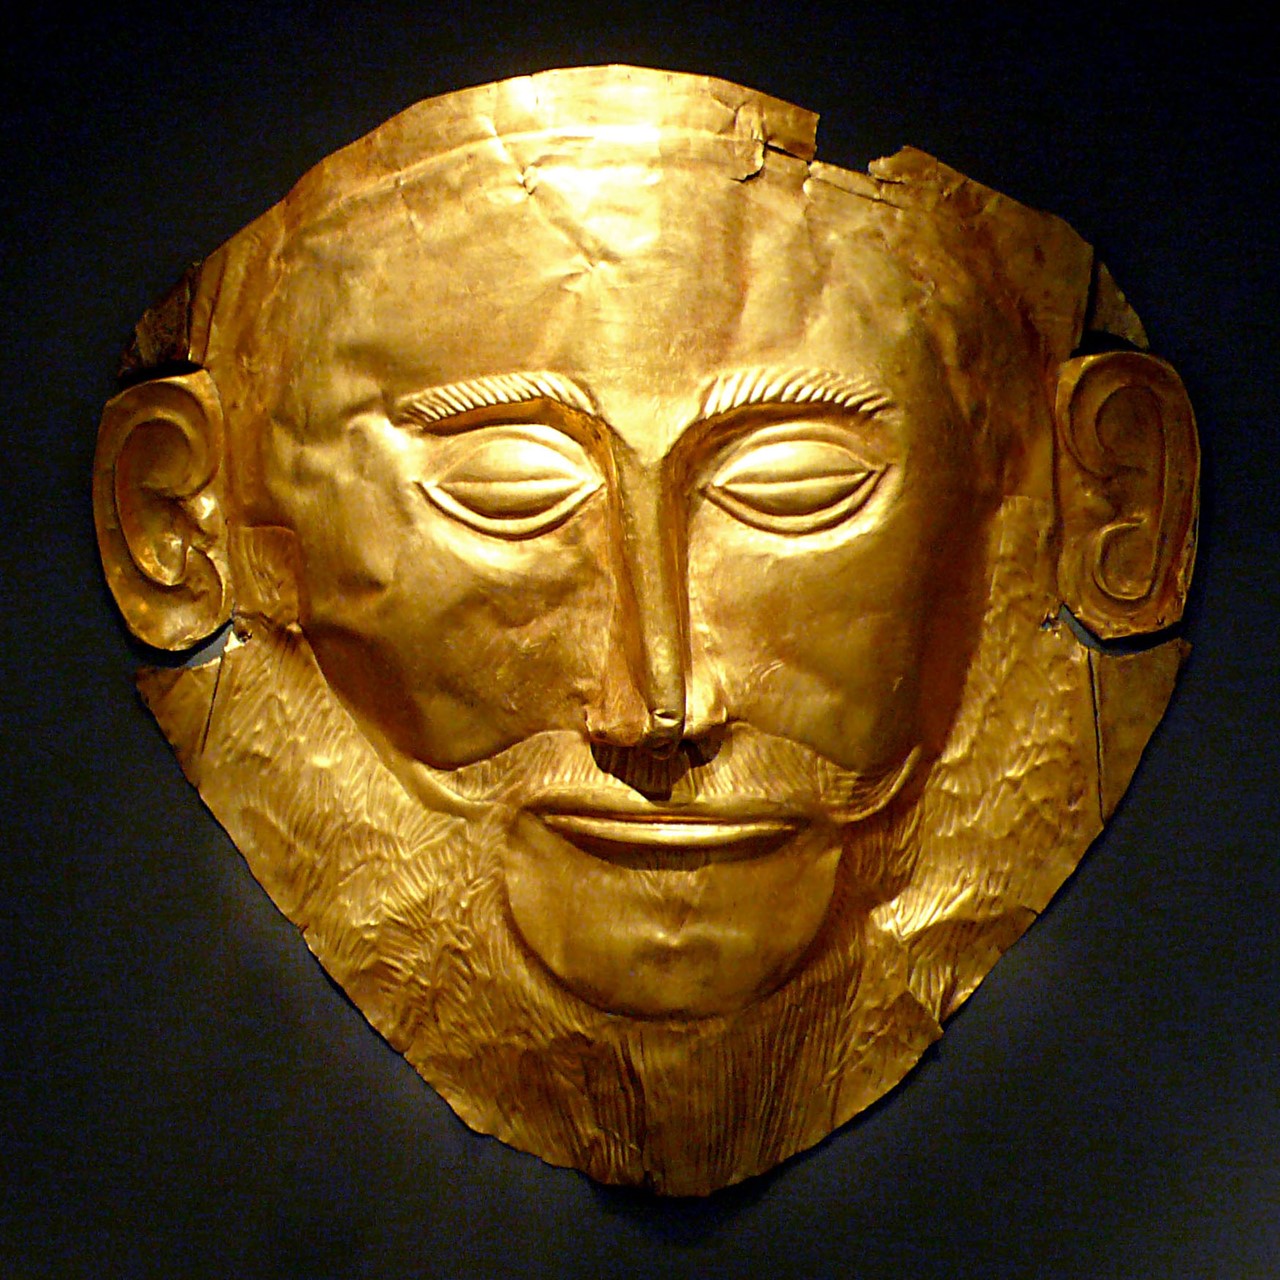 Gold Mask of Agamemnon, Late Helladic 16th century BC.